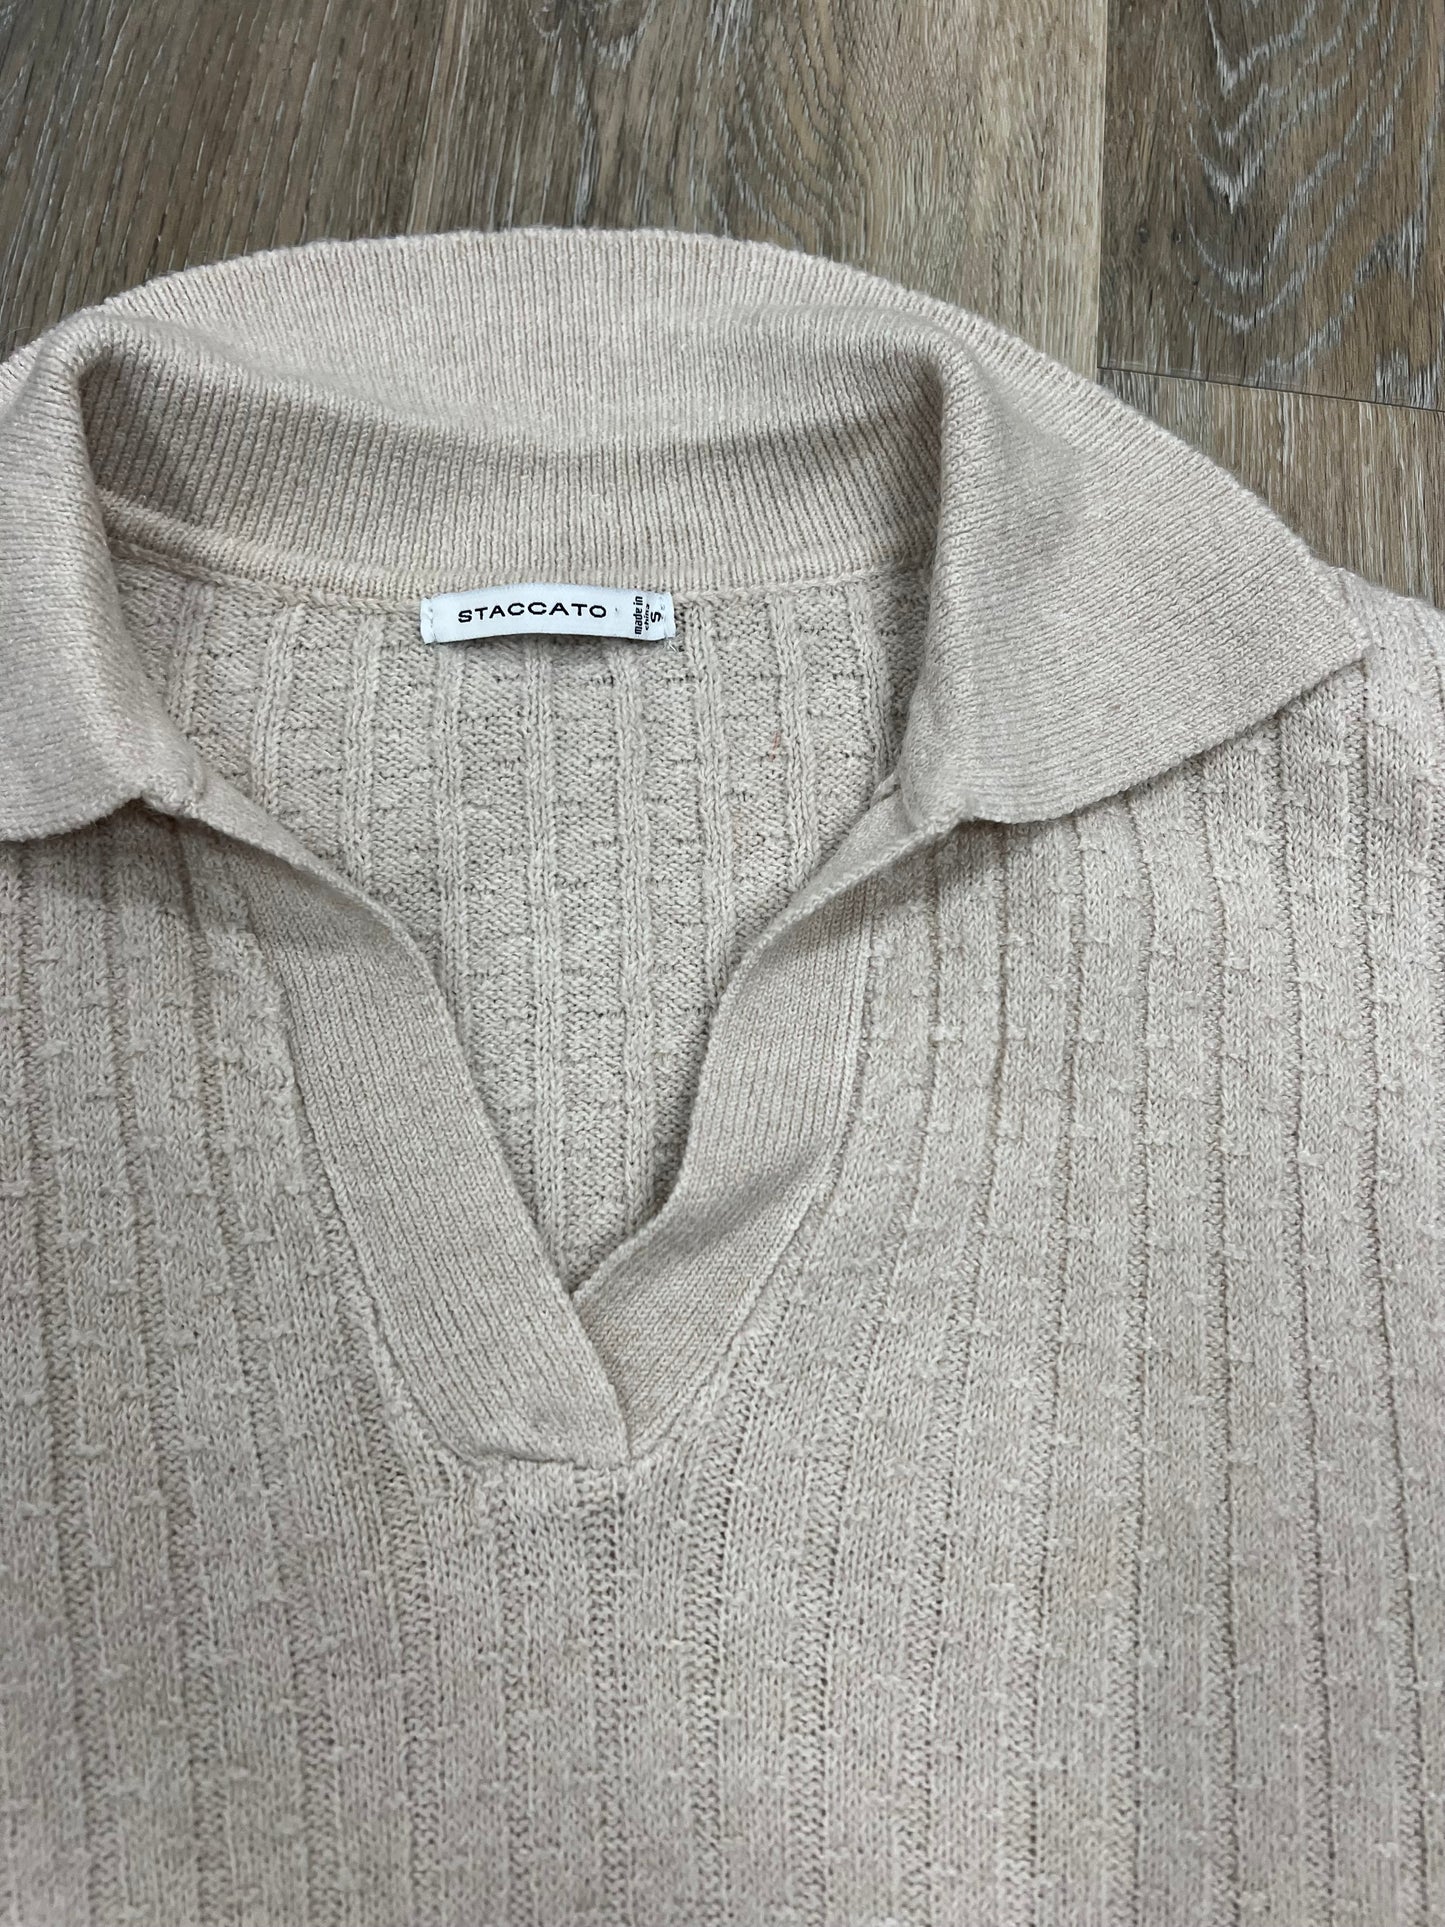 Sweater By Staccato  Size: S